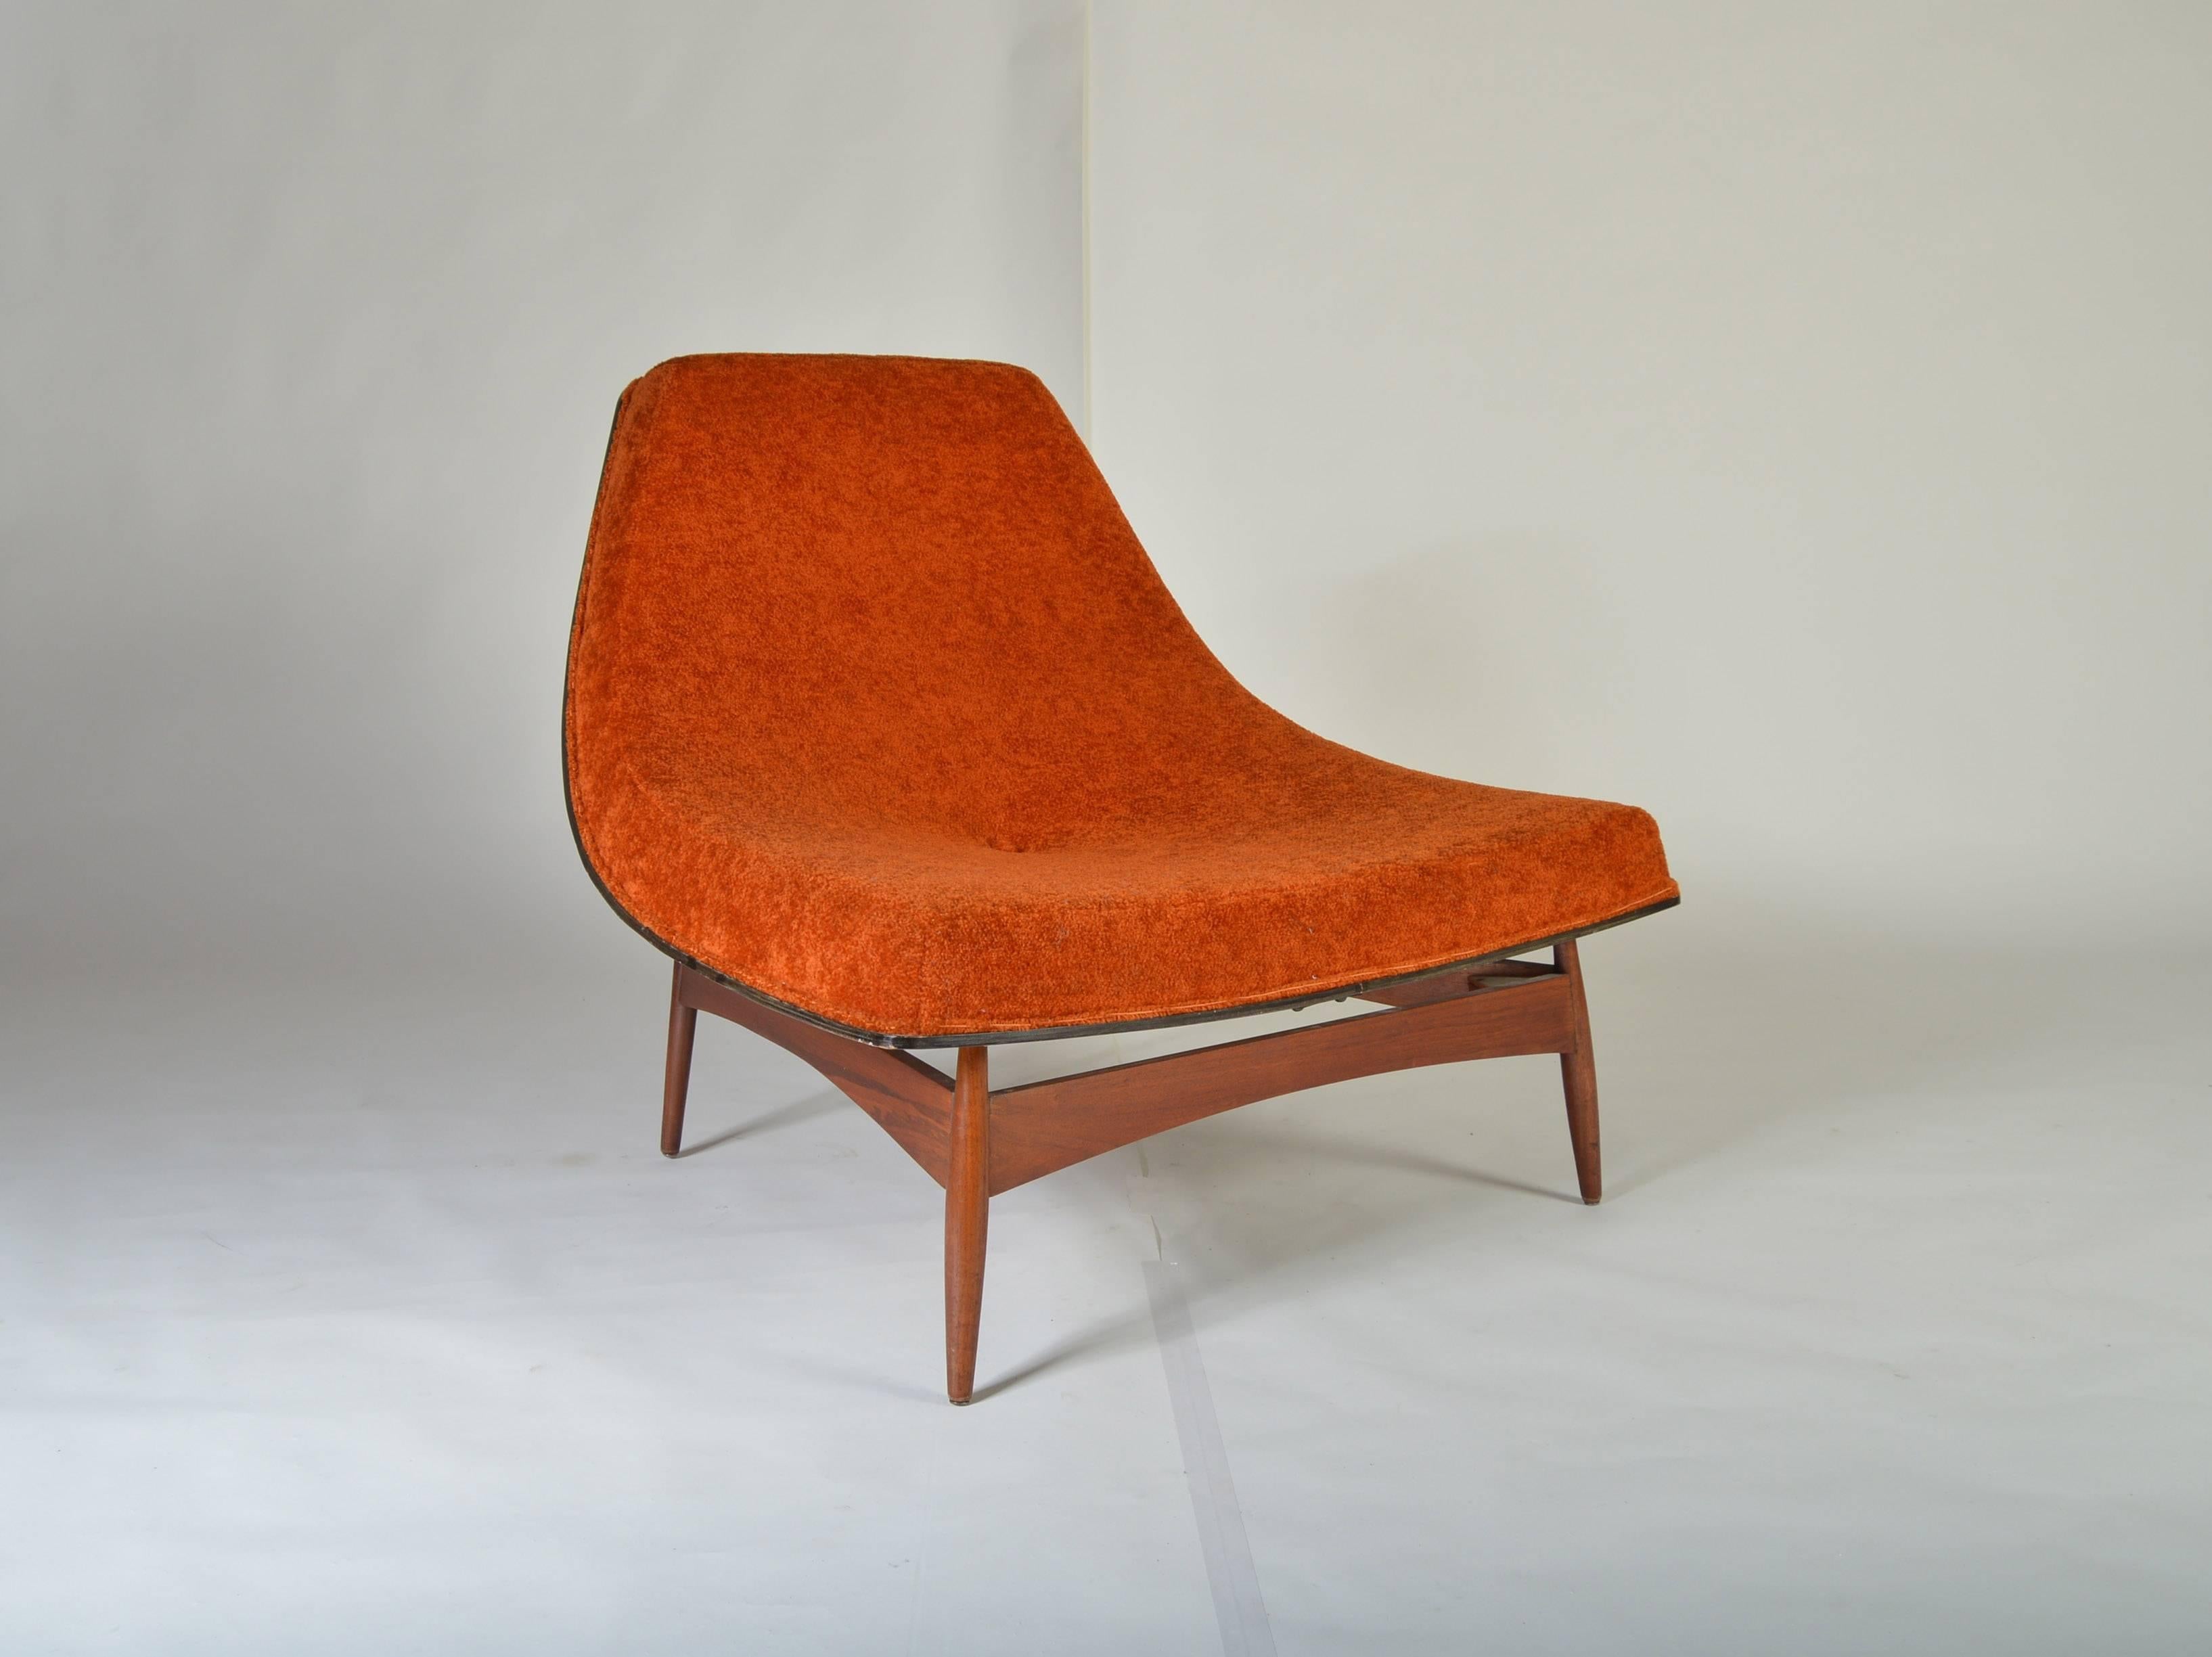 An early, pre-steel frame first edition of the chair that inspired George Nelson's "Coconut Chair." A. J. Donahue designed this chair in the late 1940s. George Nelson, having attended a design expo in Canada was inspired by this design and